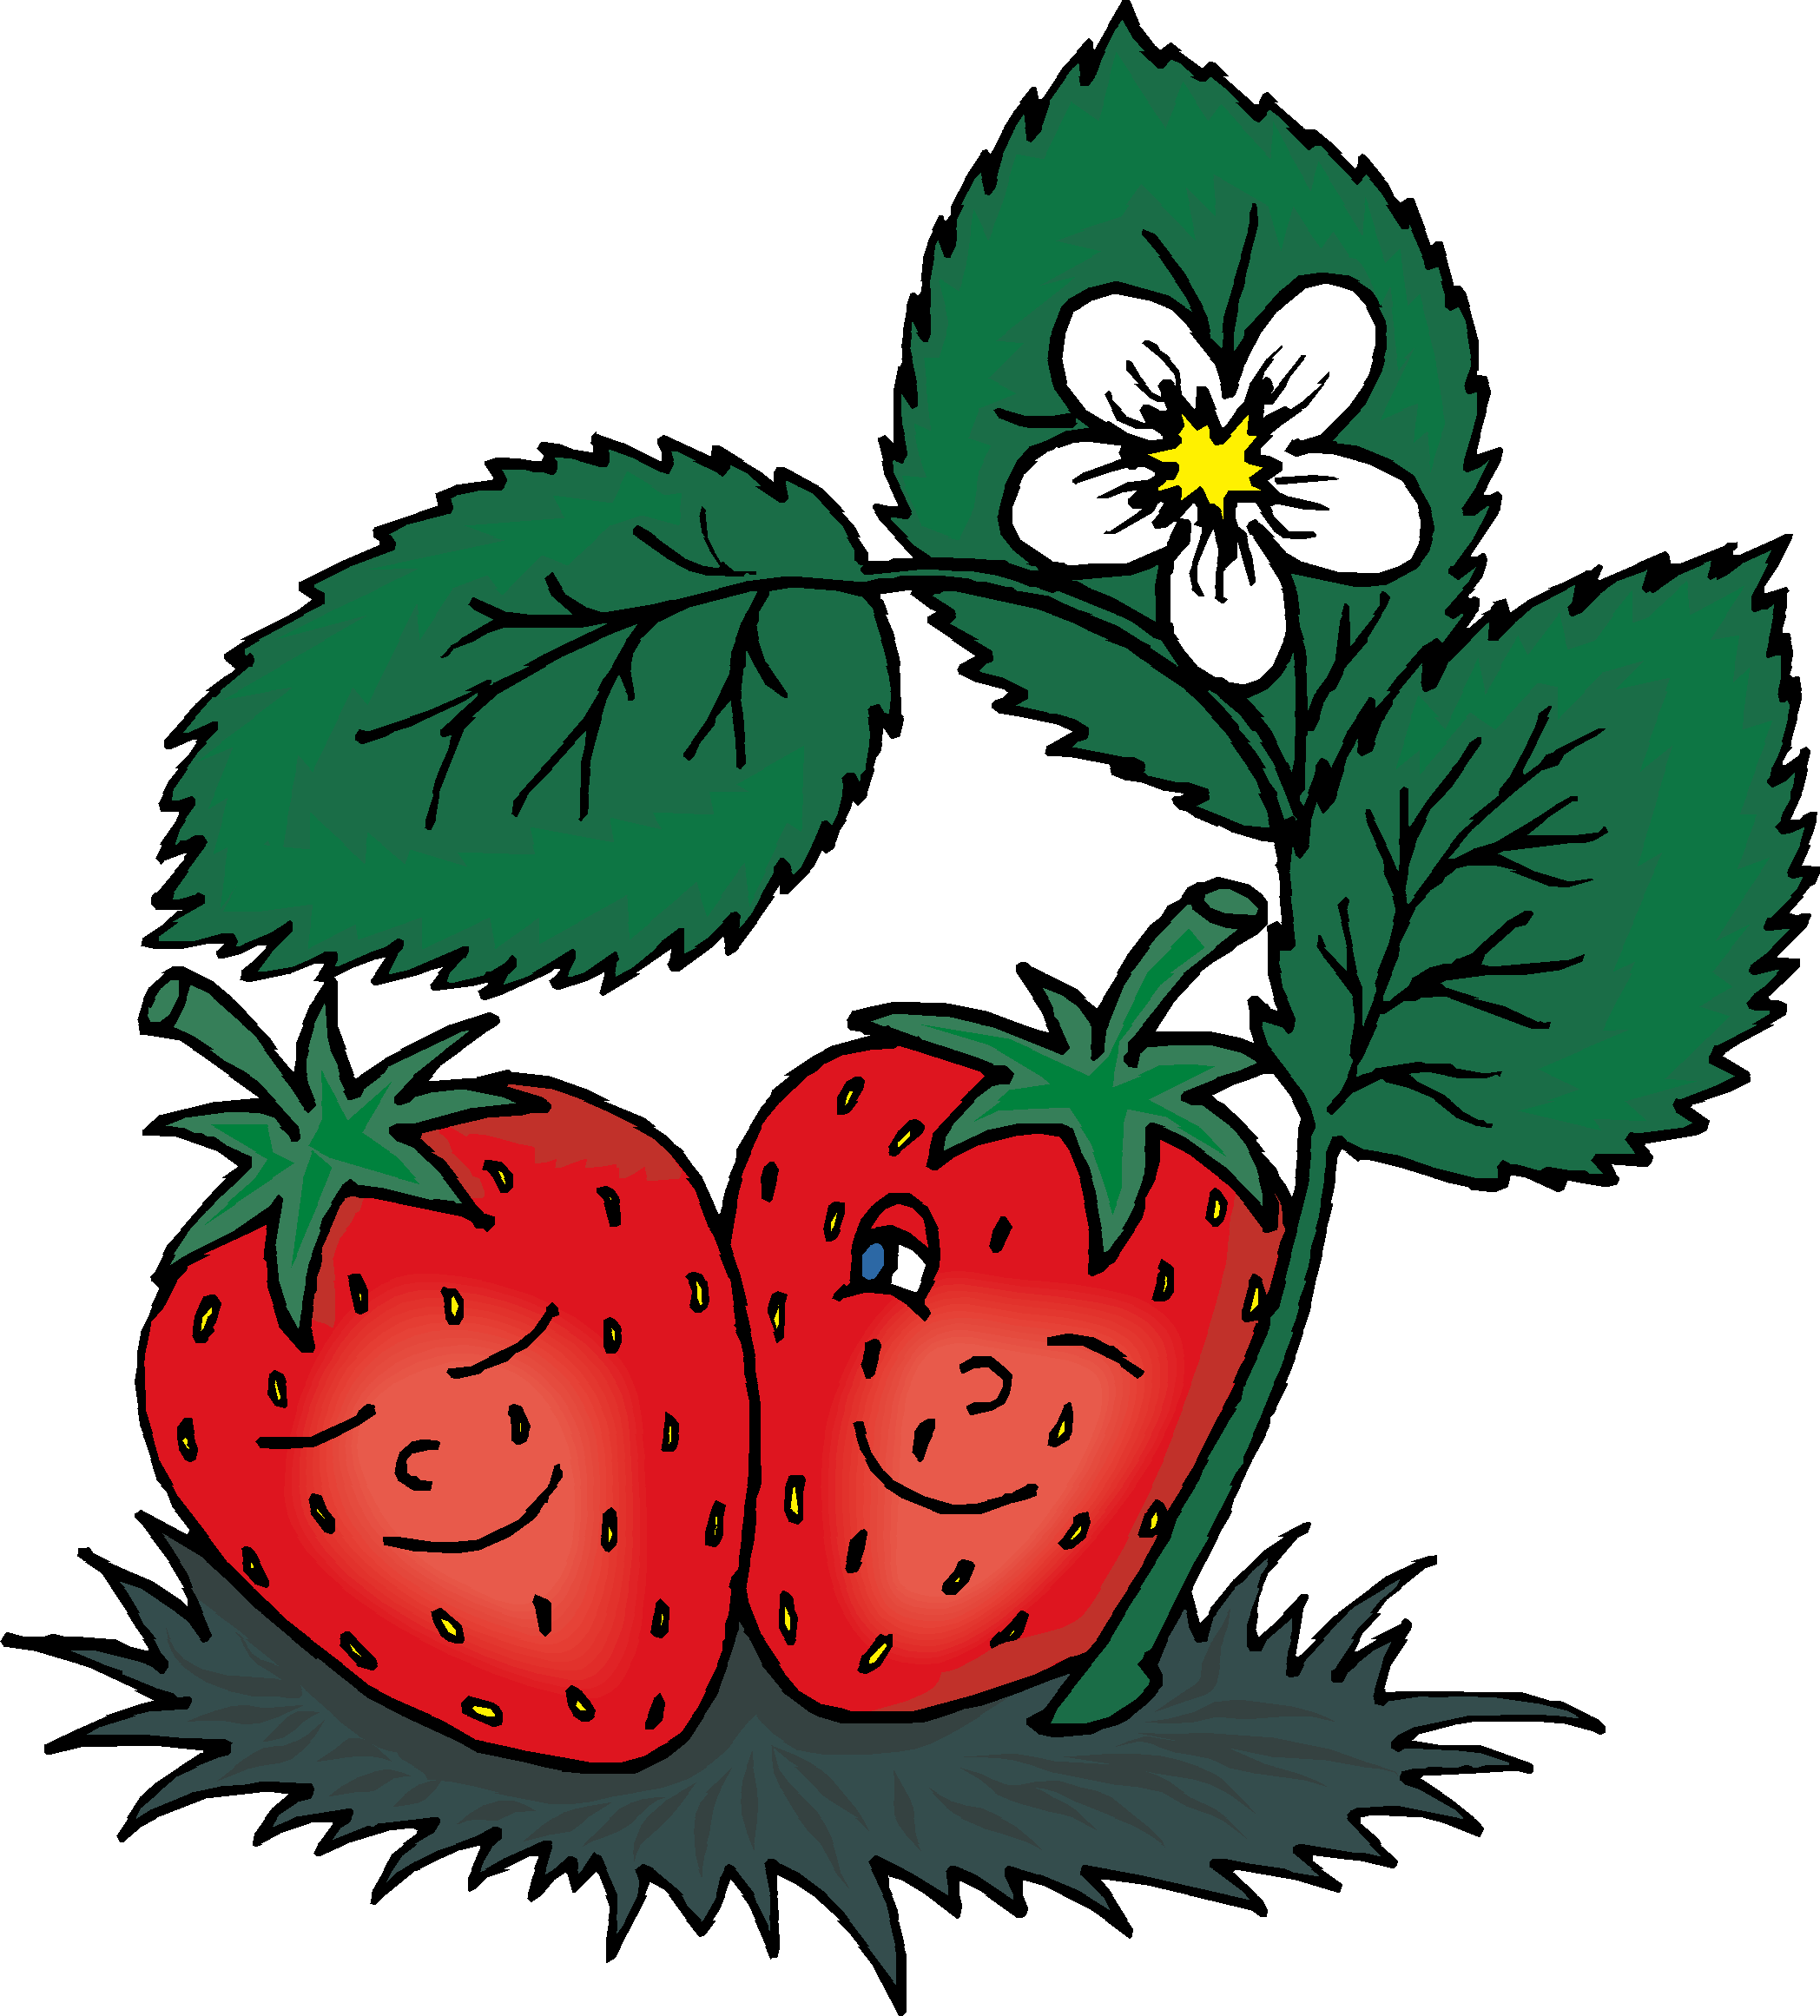 Strawberry Images 2 Wikiclipart Hd Image Clipart